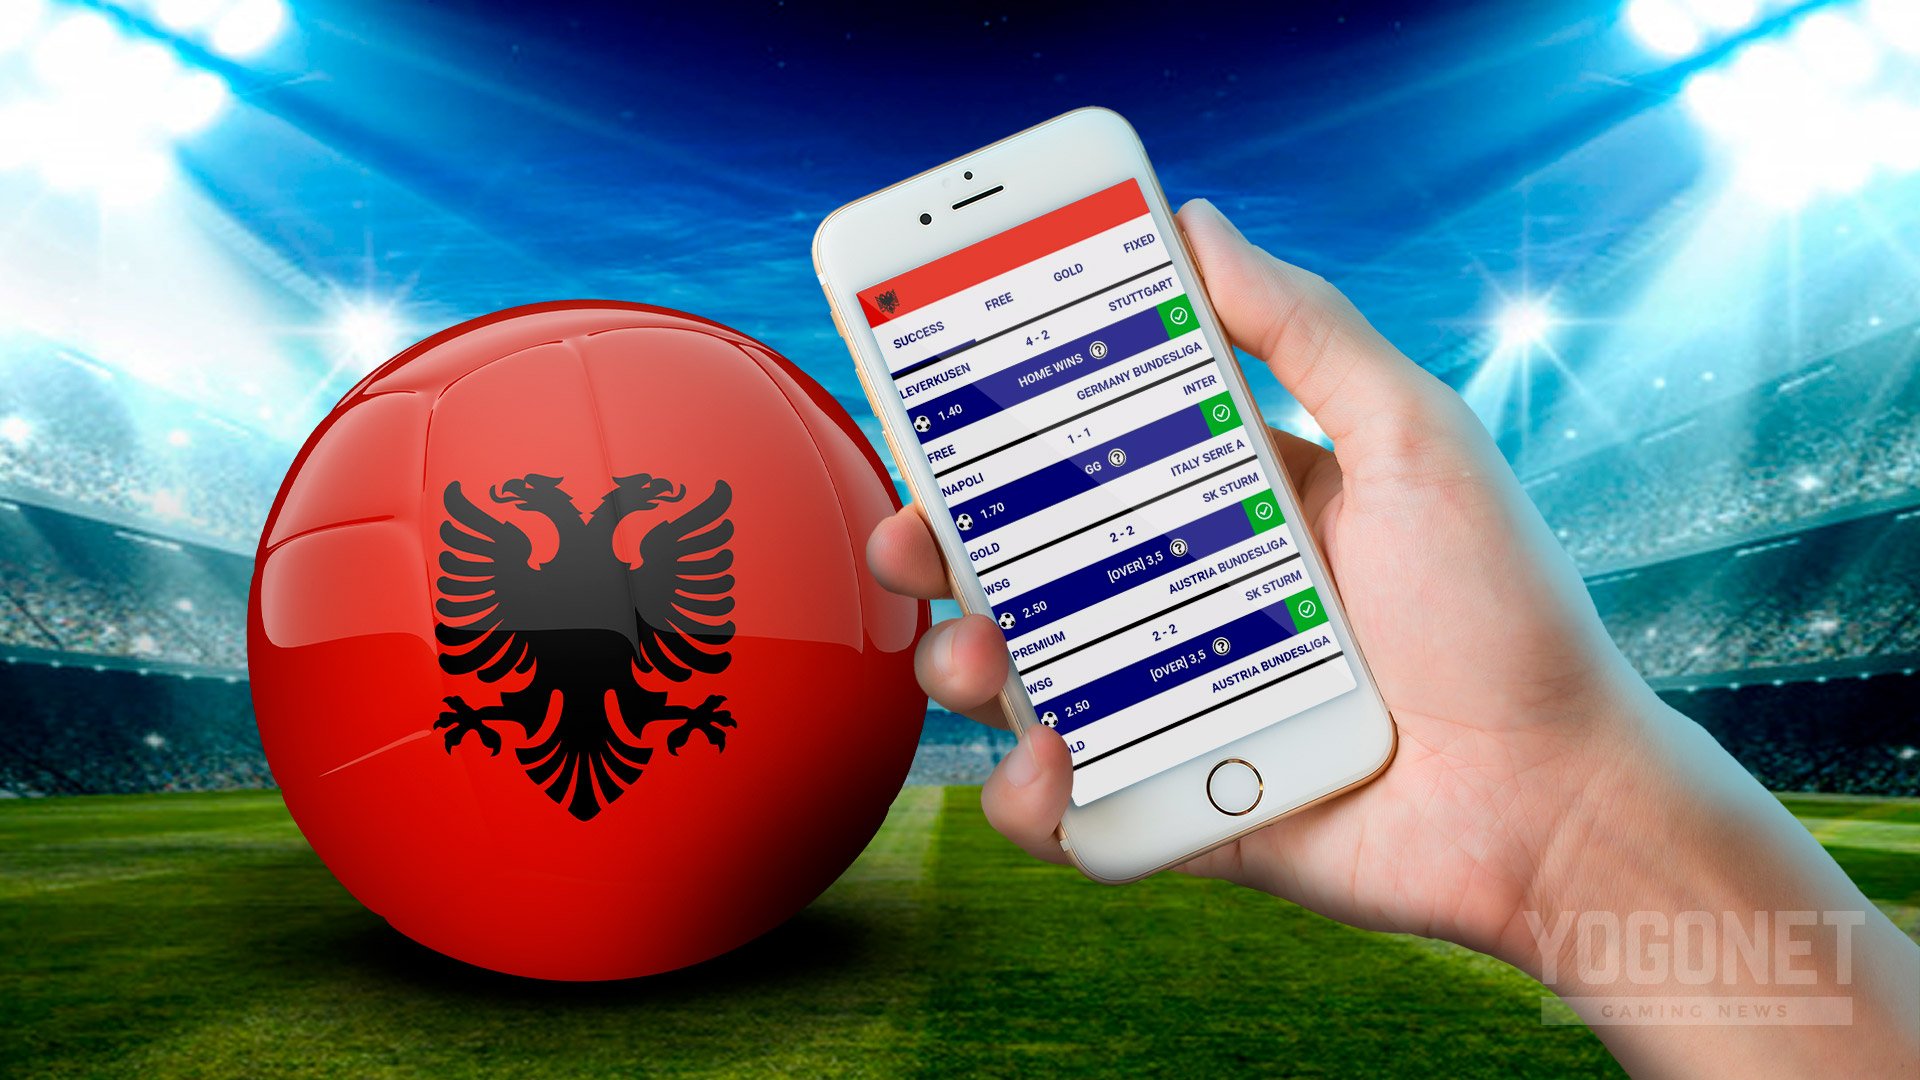 Albanian government faces resistance over proposed reintroduction of online gambling